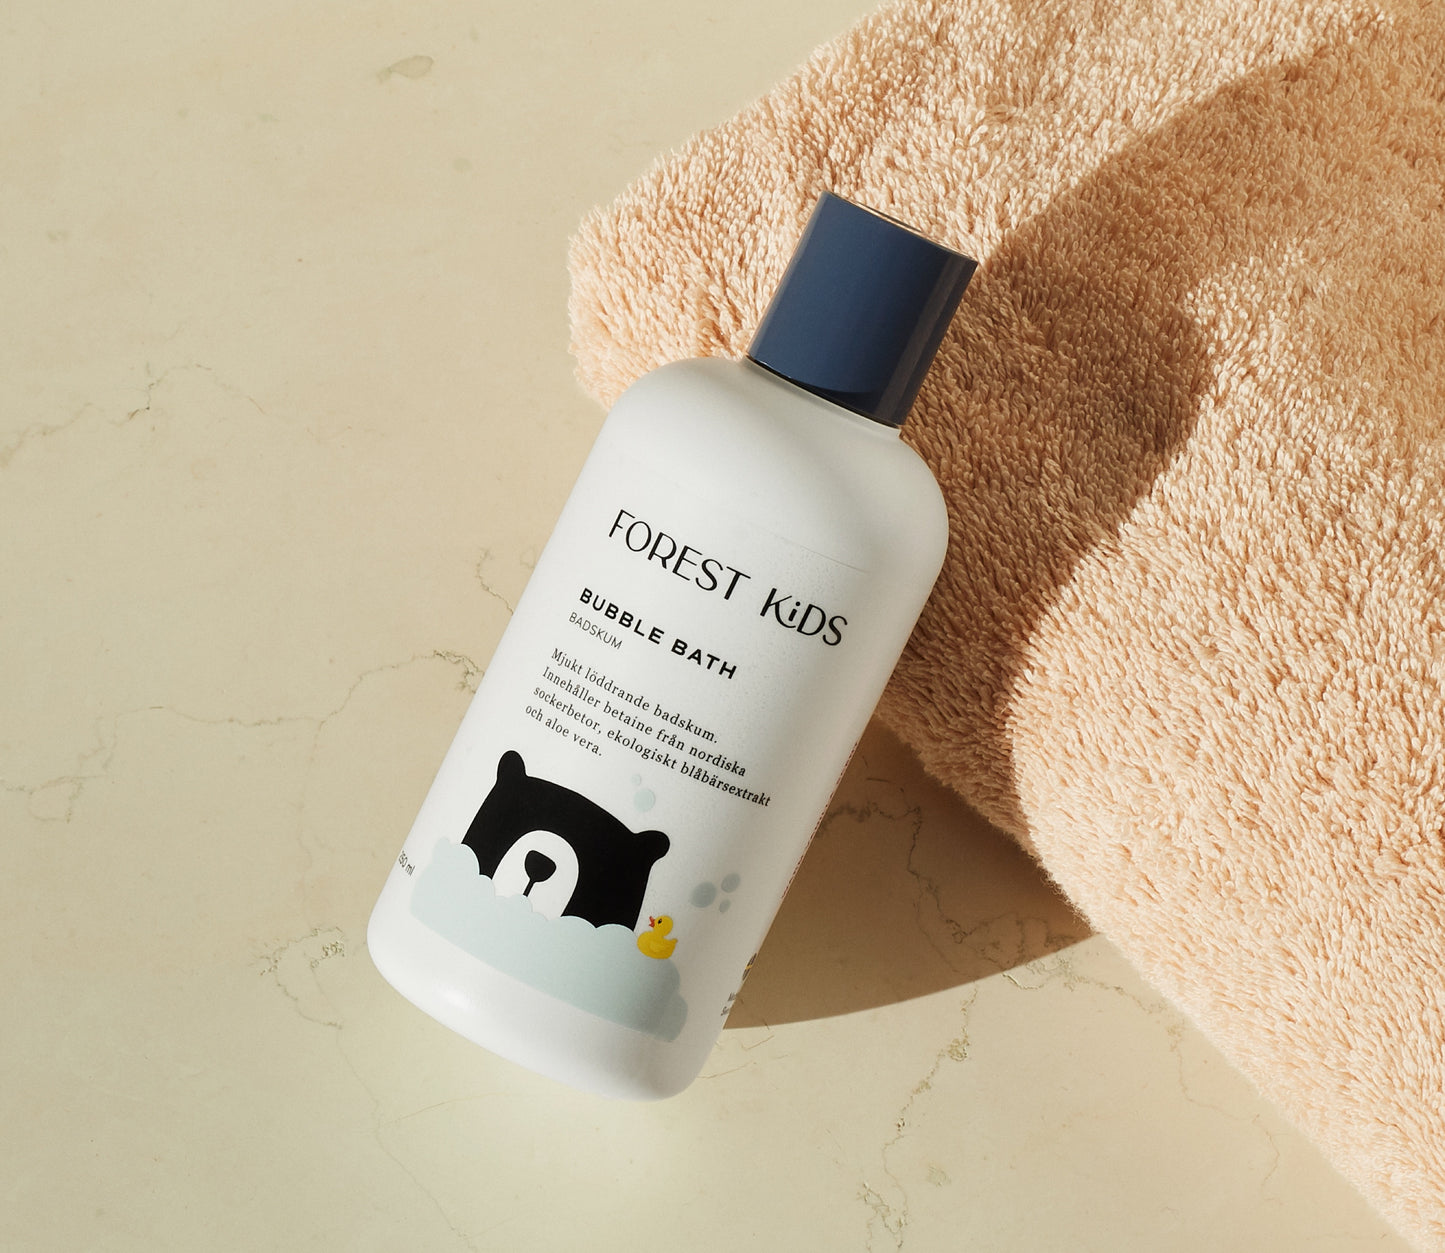 Forest Kids Bubble Bath for the whole family